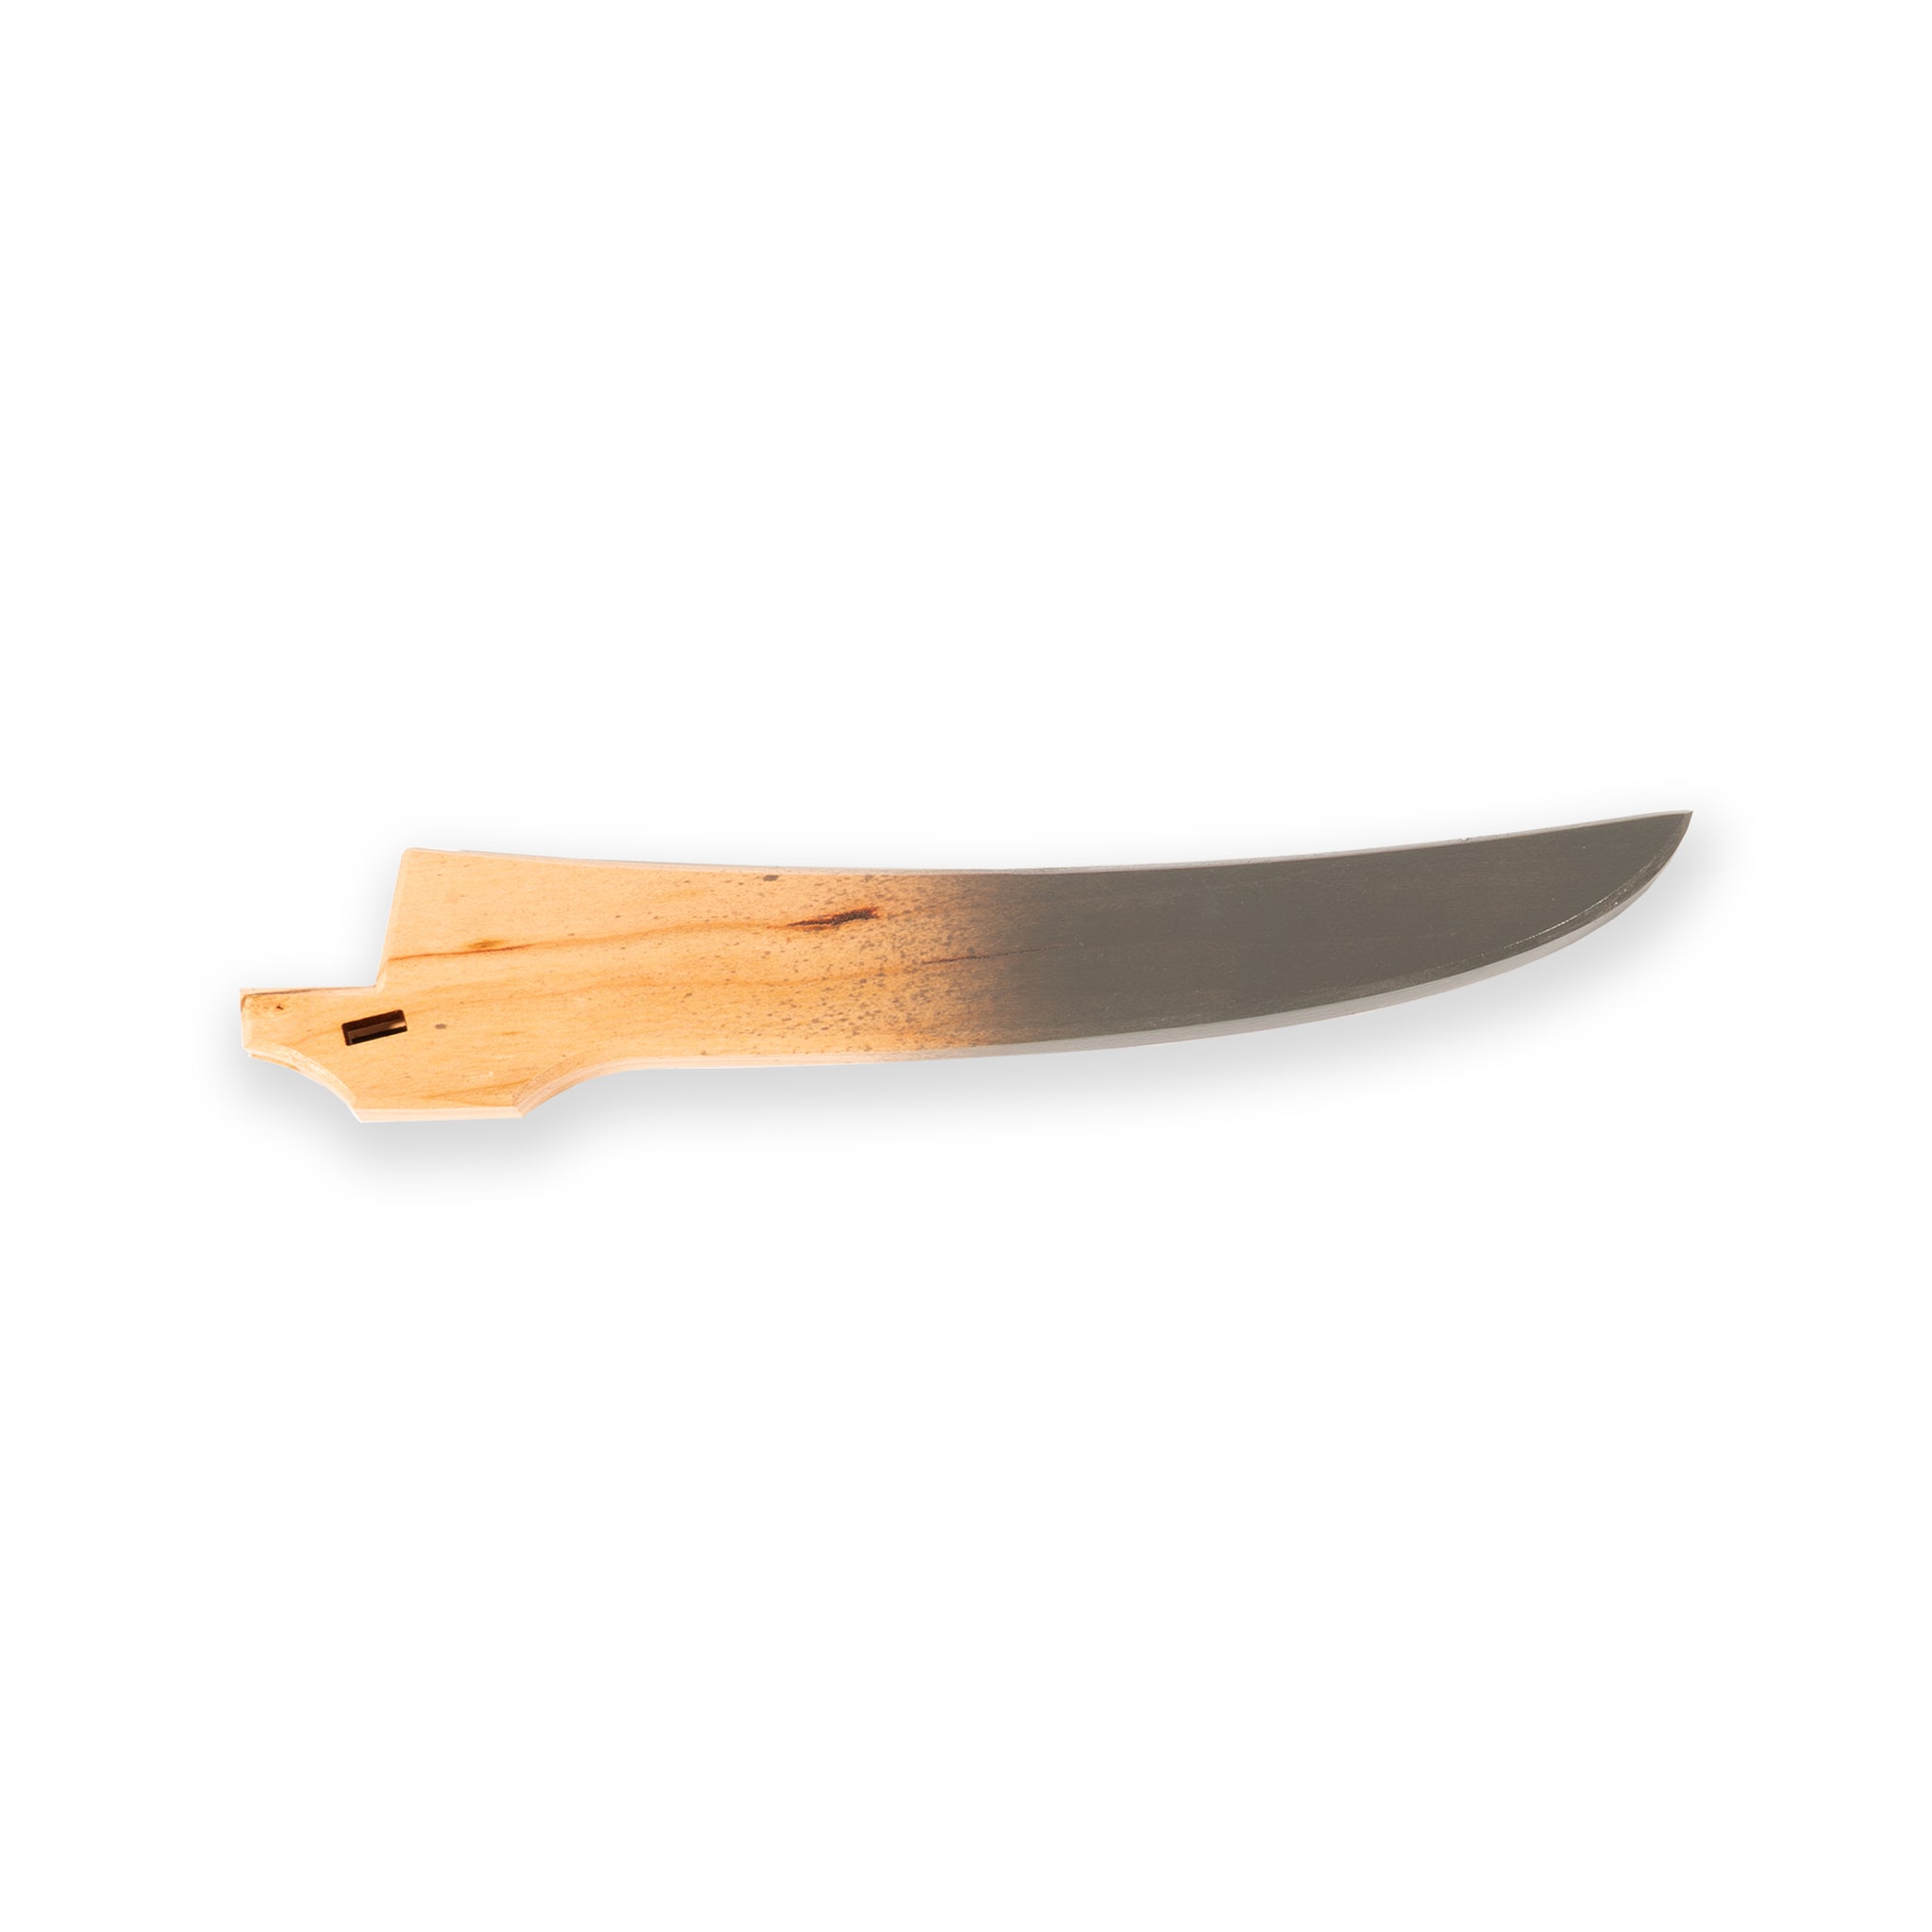 eXo Blue Curved Boning saya knife cover cherrywood with grey detail.